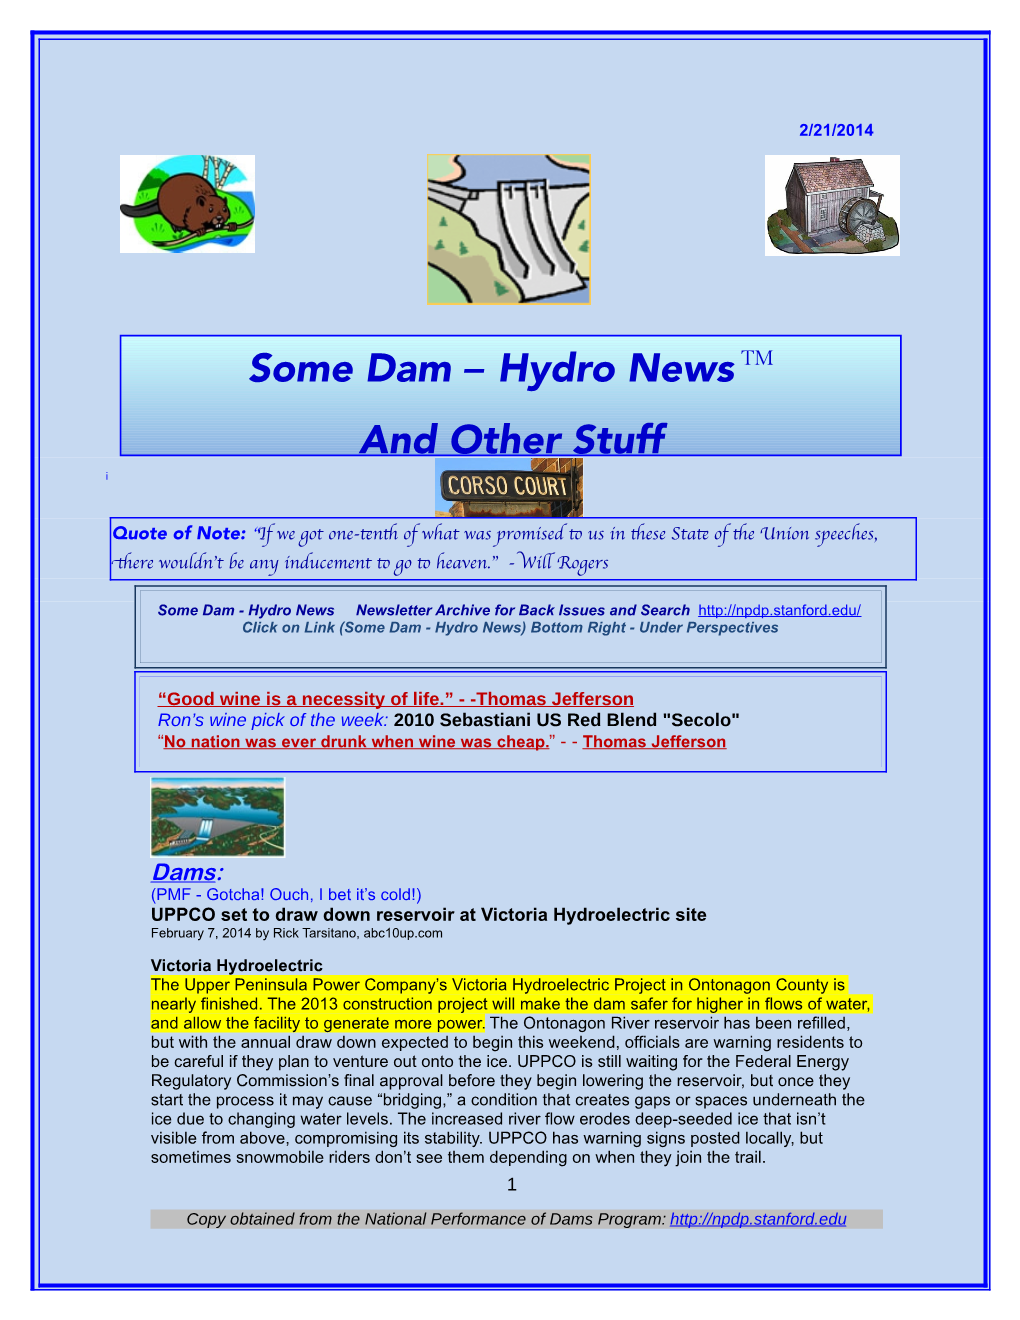 Some Dam – Hydro Newstm and Other Stuff